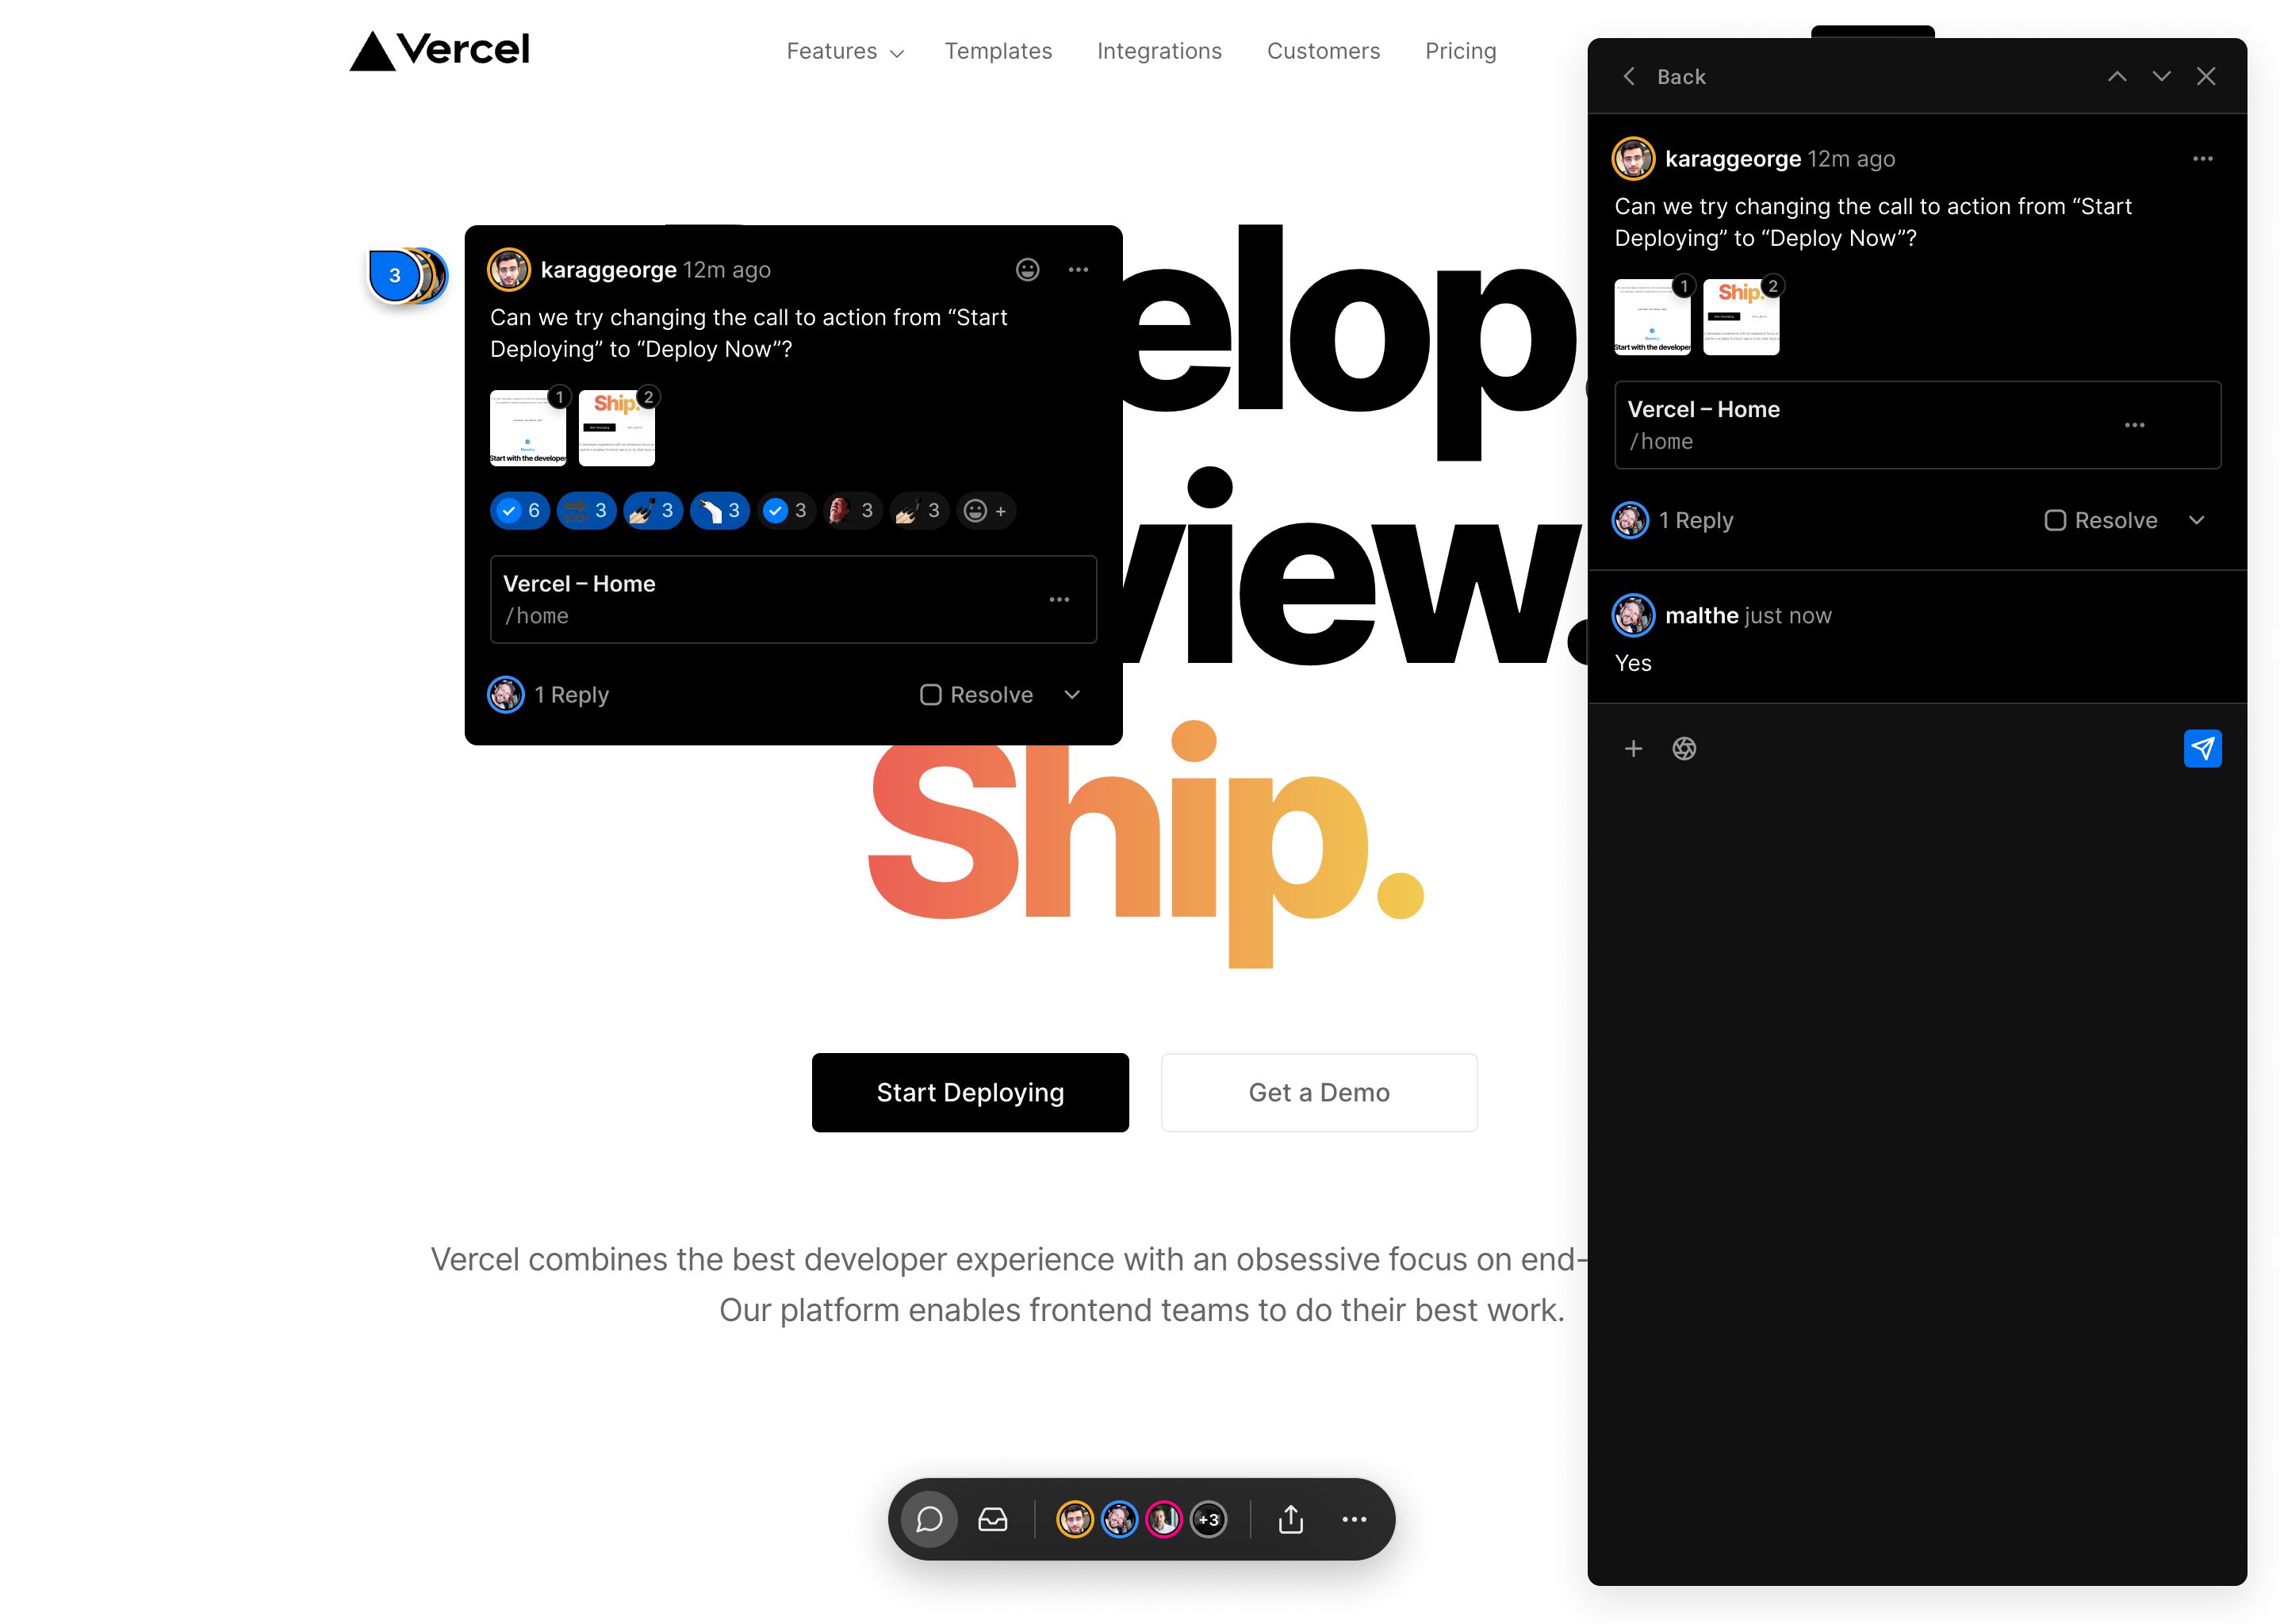 Vercel makes it easier to collaborate on preview deployments